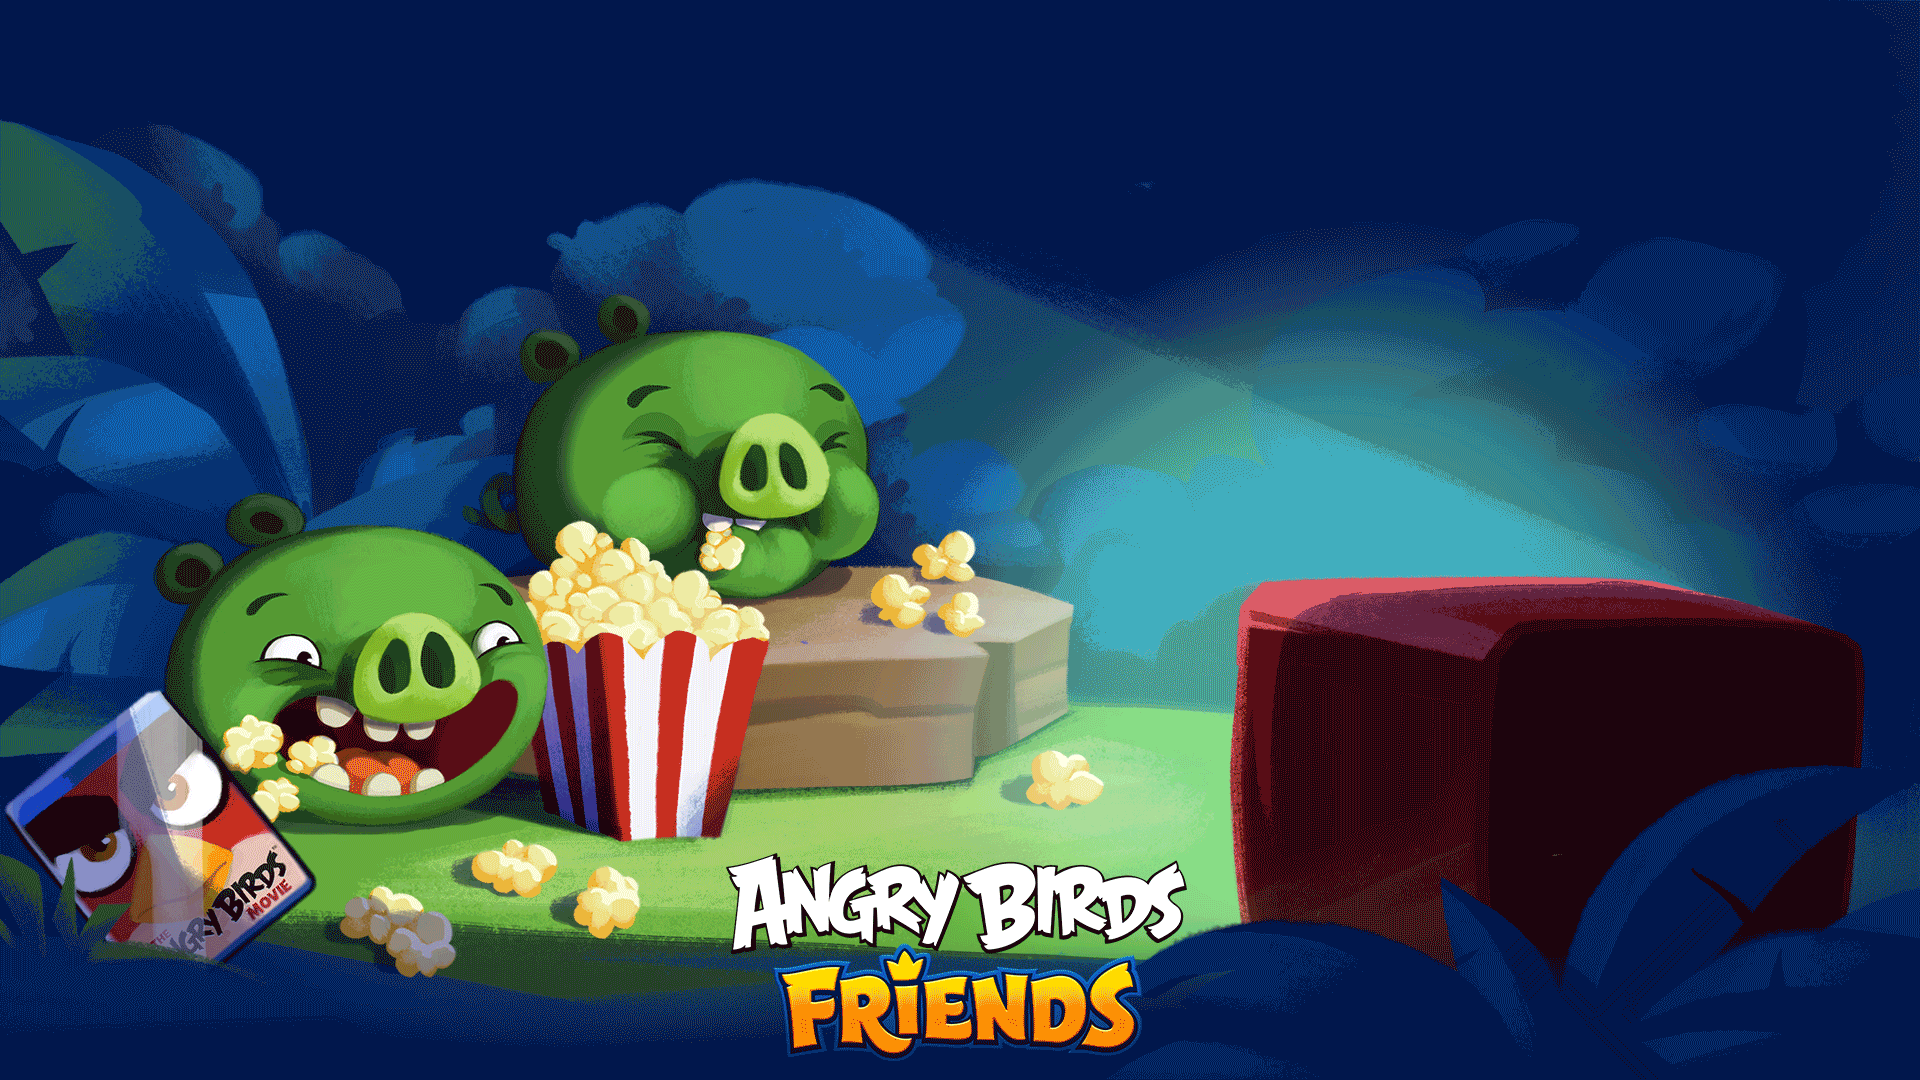 Angry Birds Friends Angry Birds Movie Wingman Gif Find On Gifer